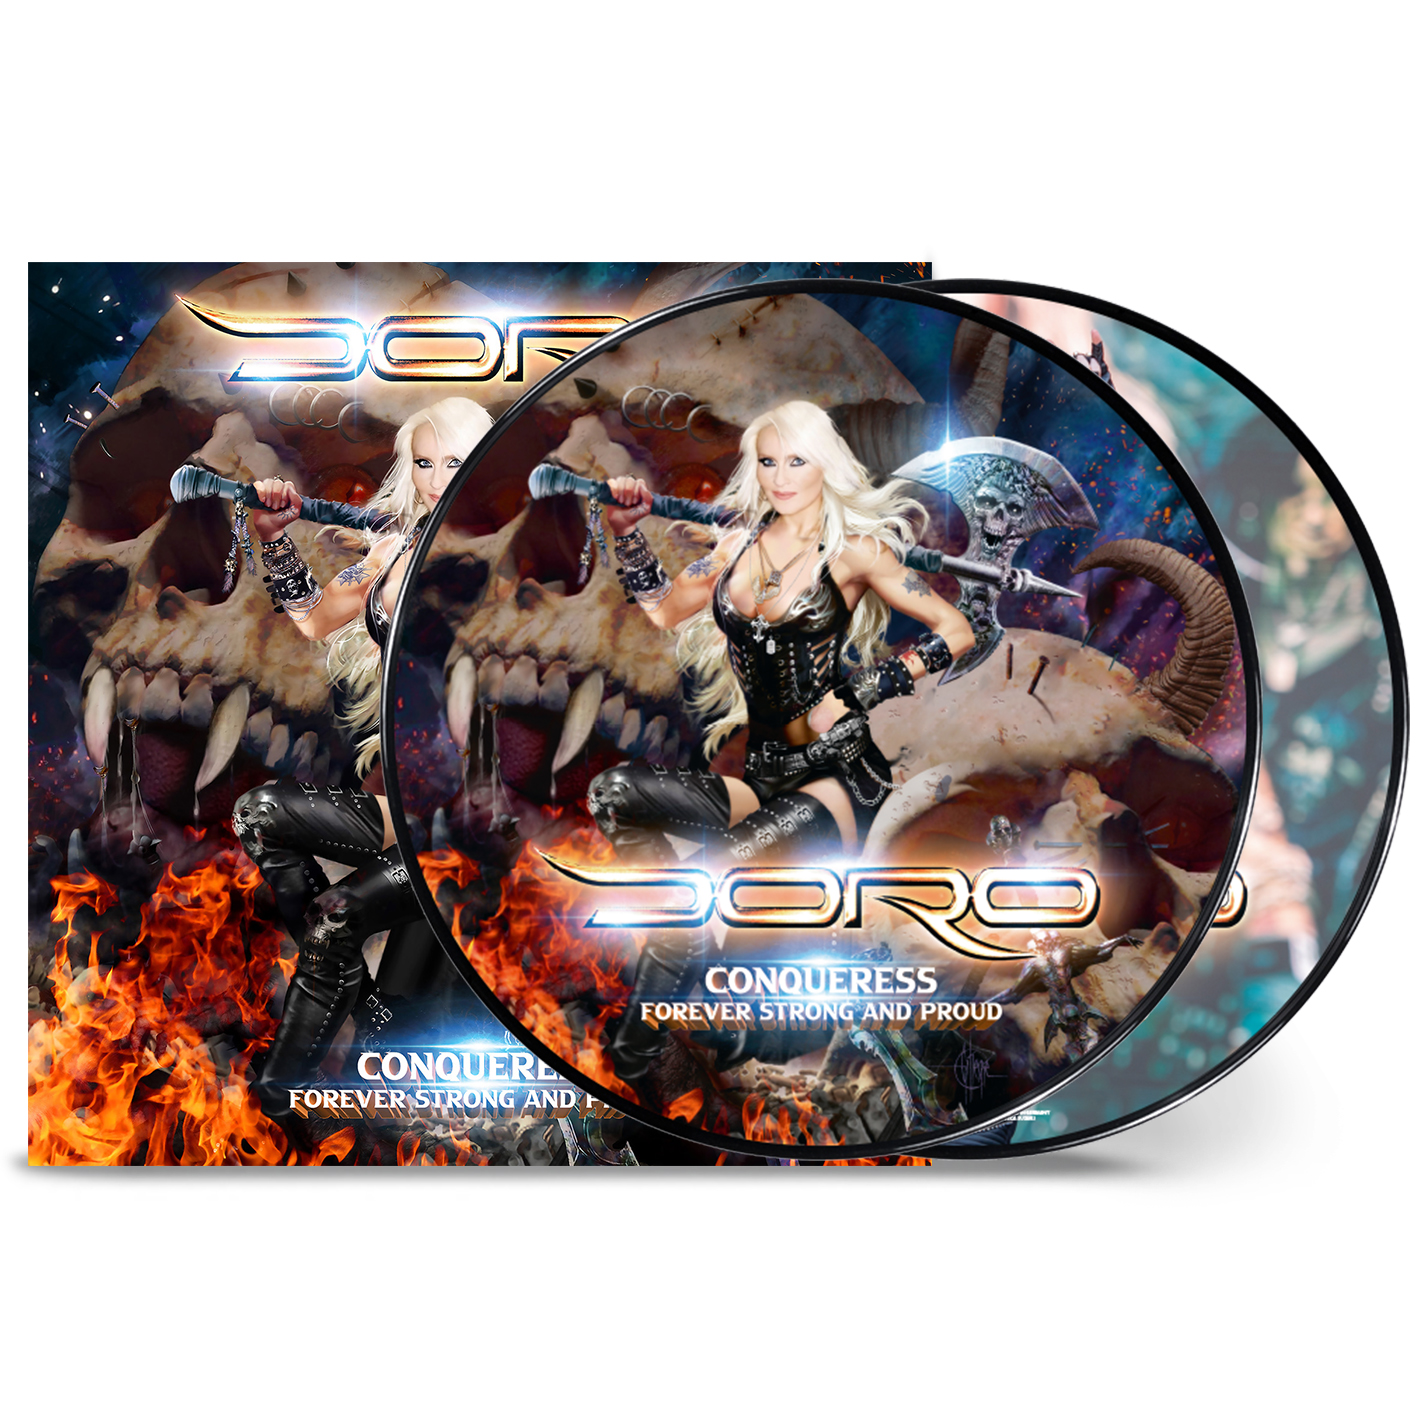 Doro - Conqueress - Forever Proud and - (Vinyl) Strong